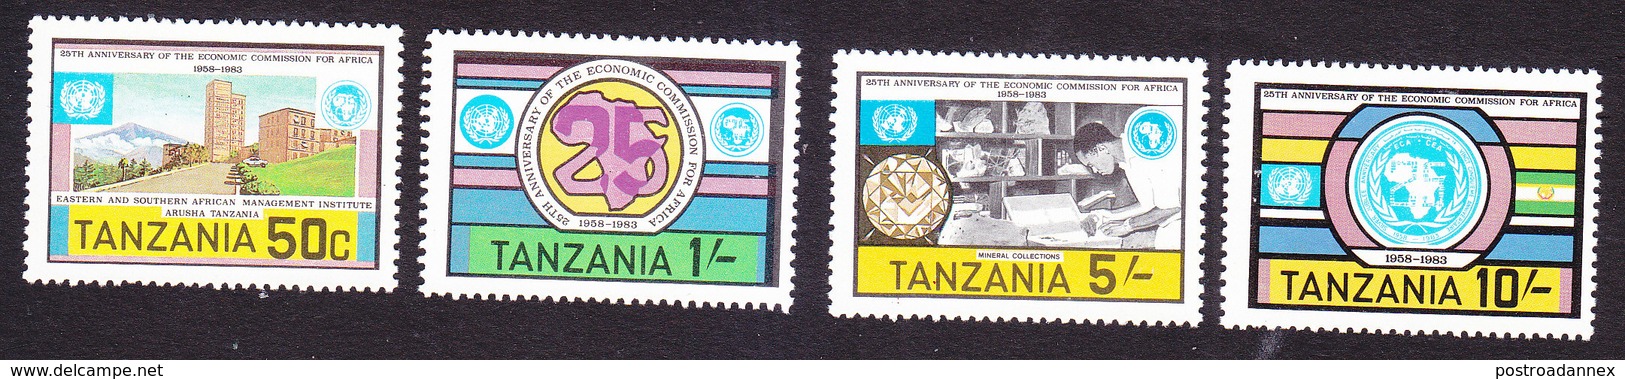 Tanzania, Scott #225-228, Mint Hinged, 25th Ann Of Economic Commission For Africa, Issued 1983 - Tanzanie (1964-...)